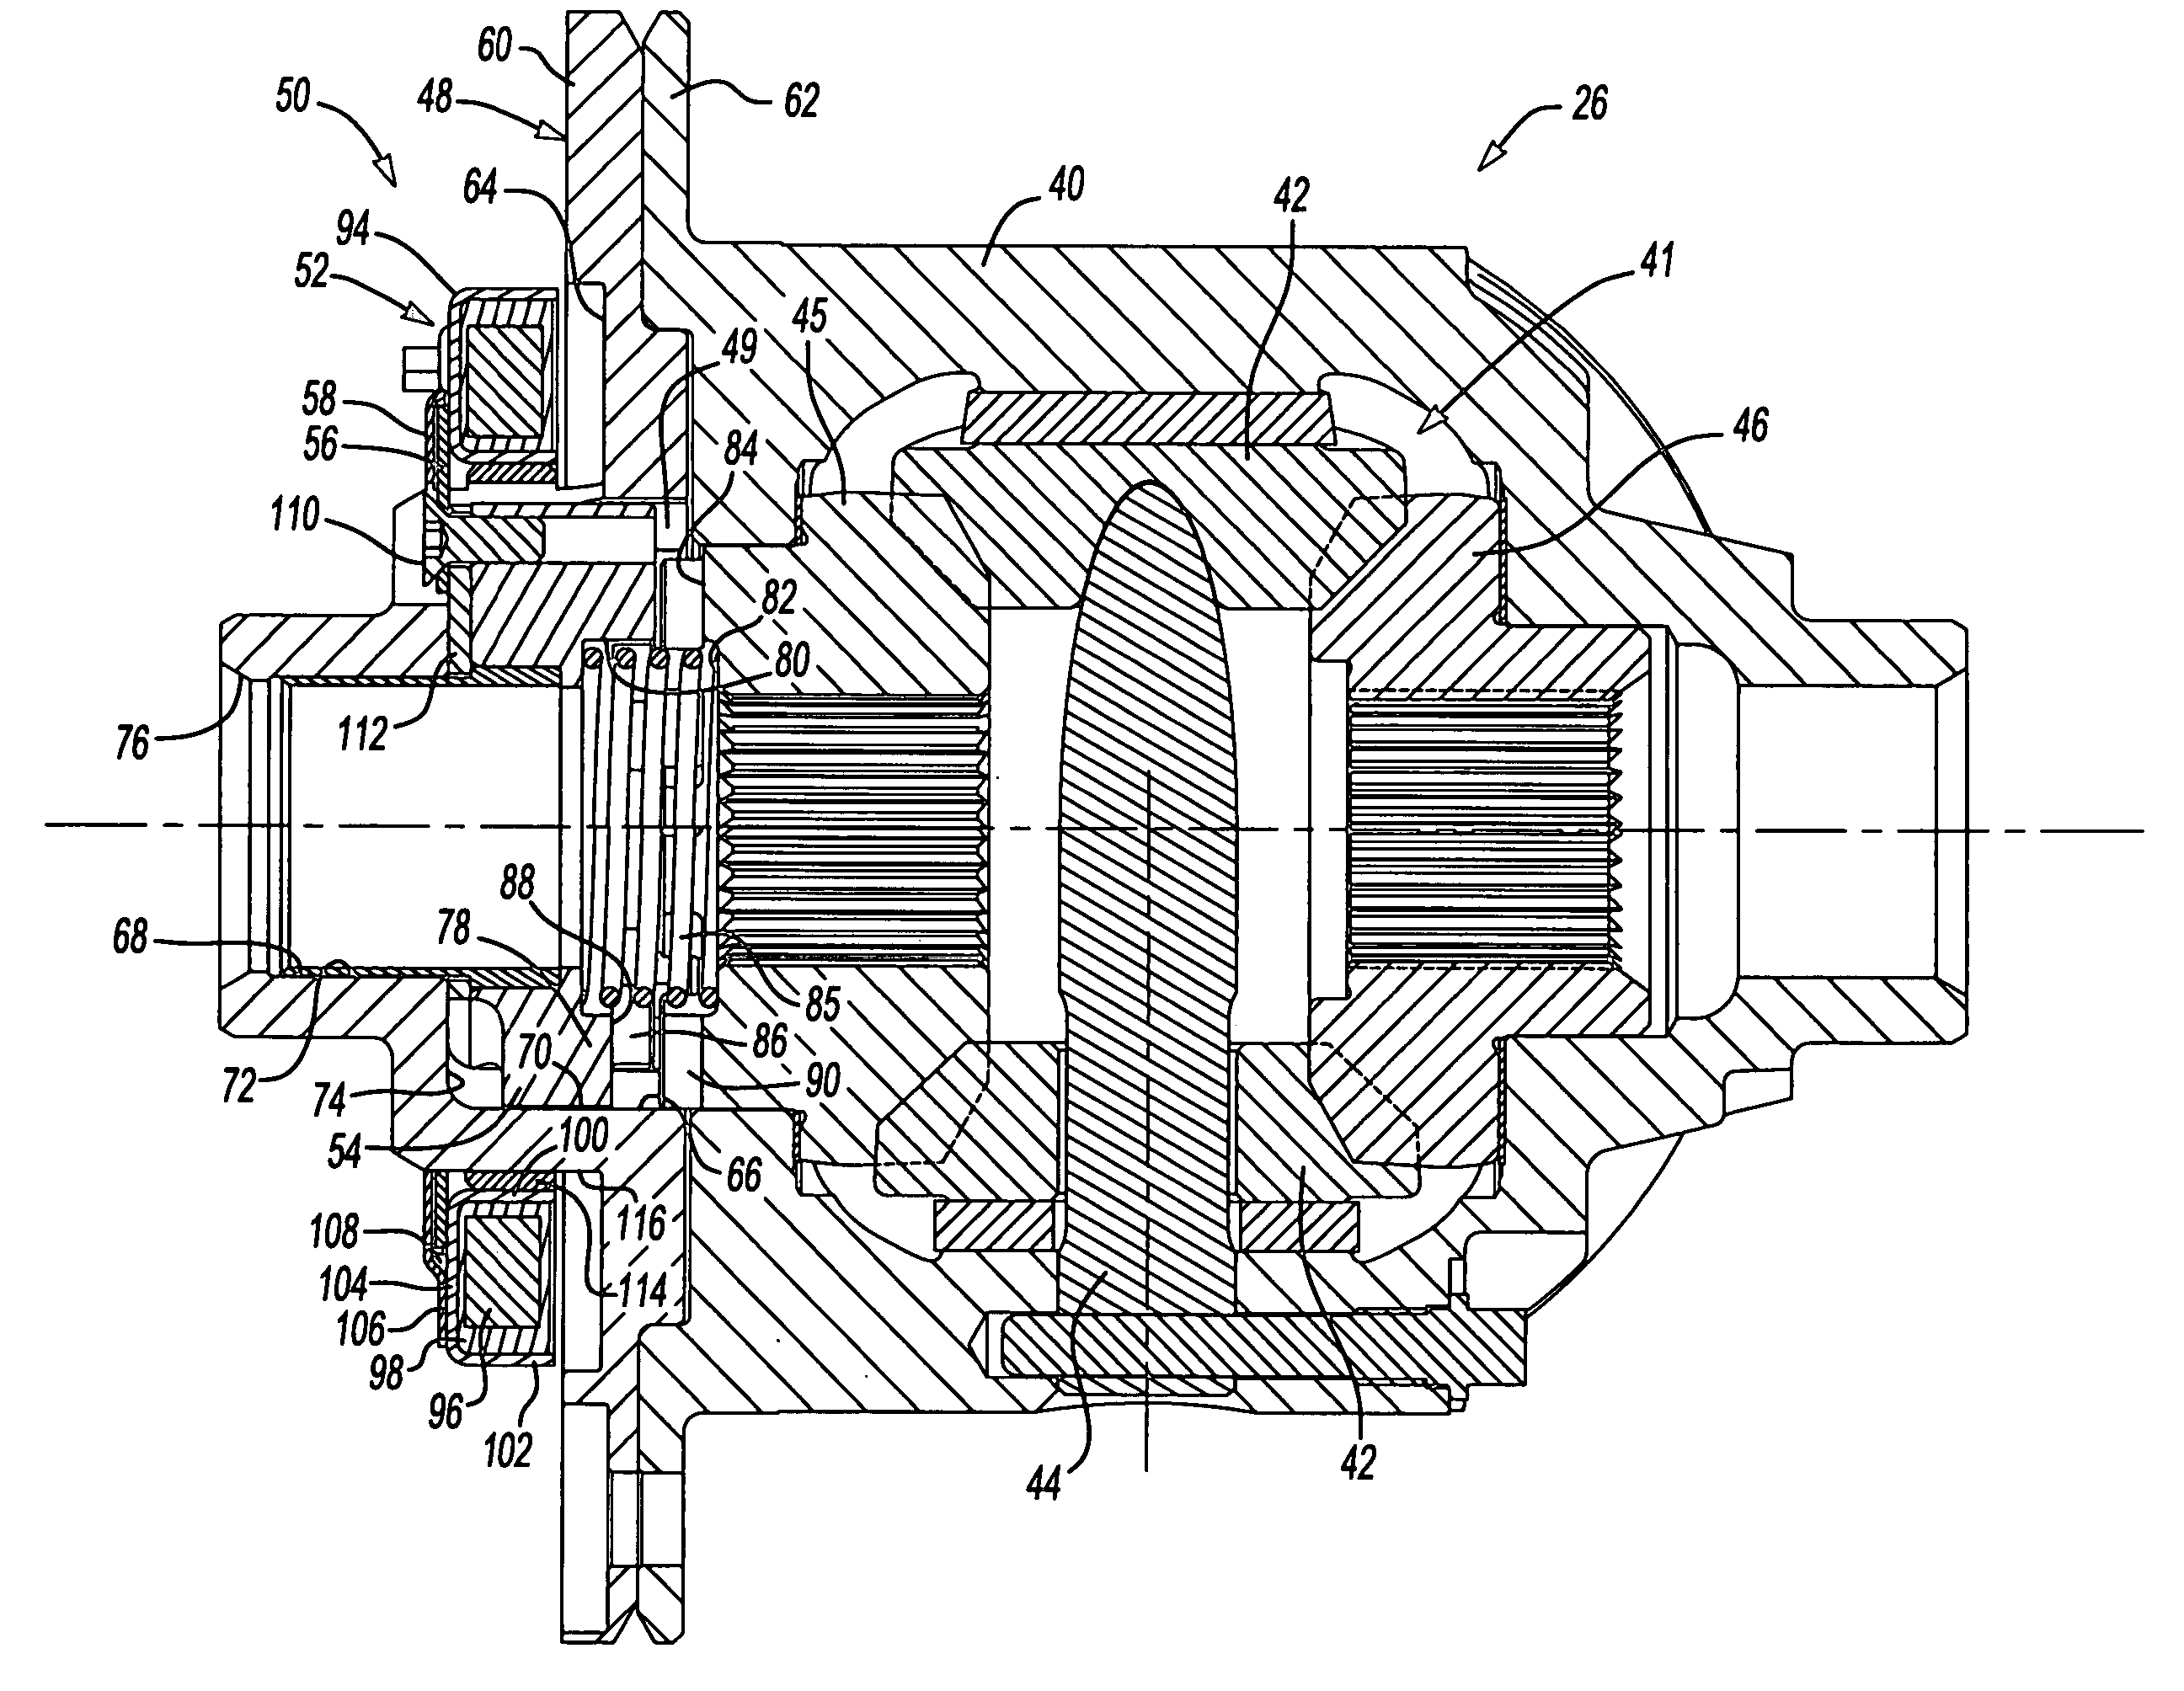 Locking differential with electromagnetic actuator